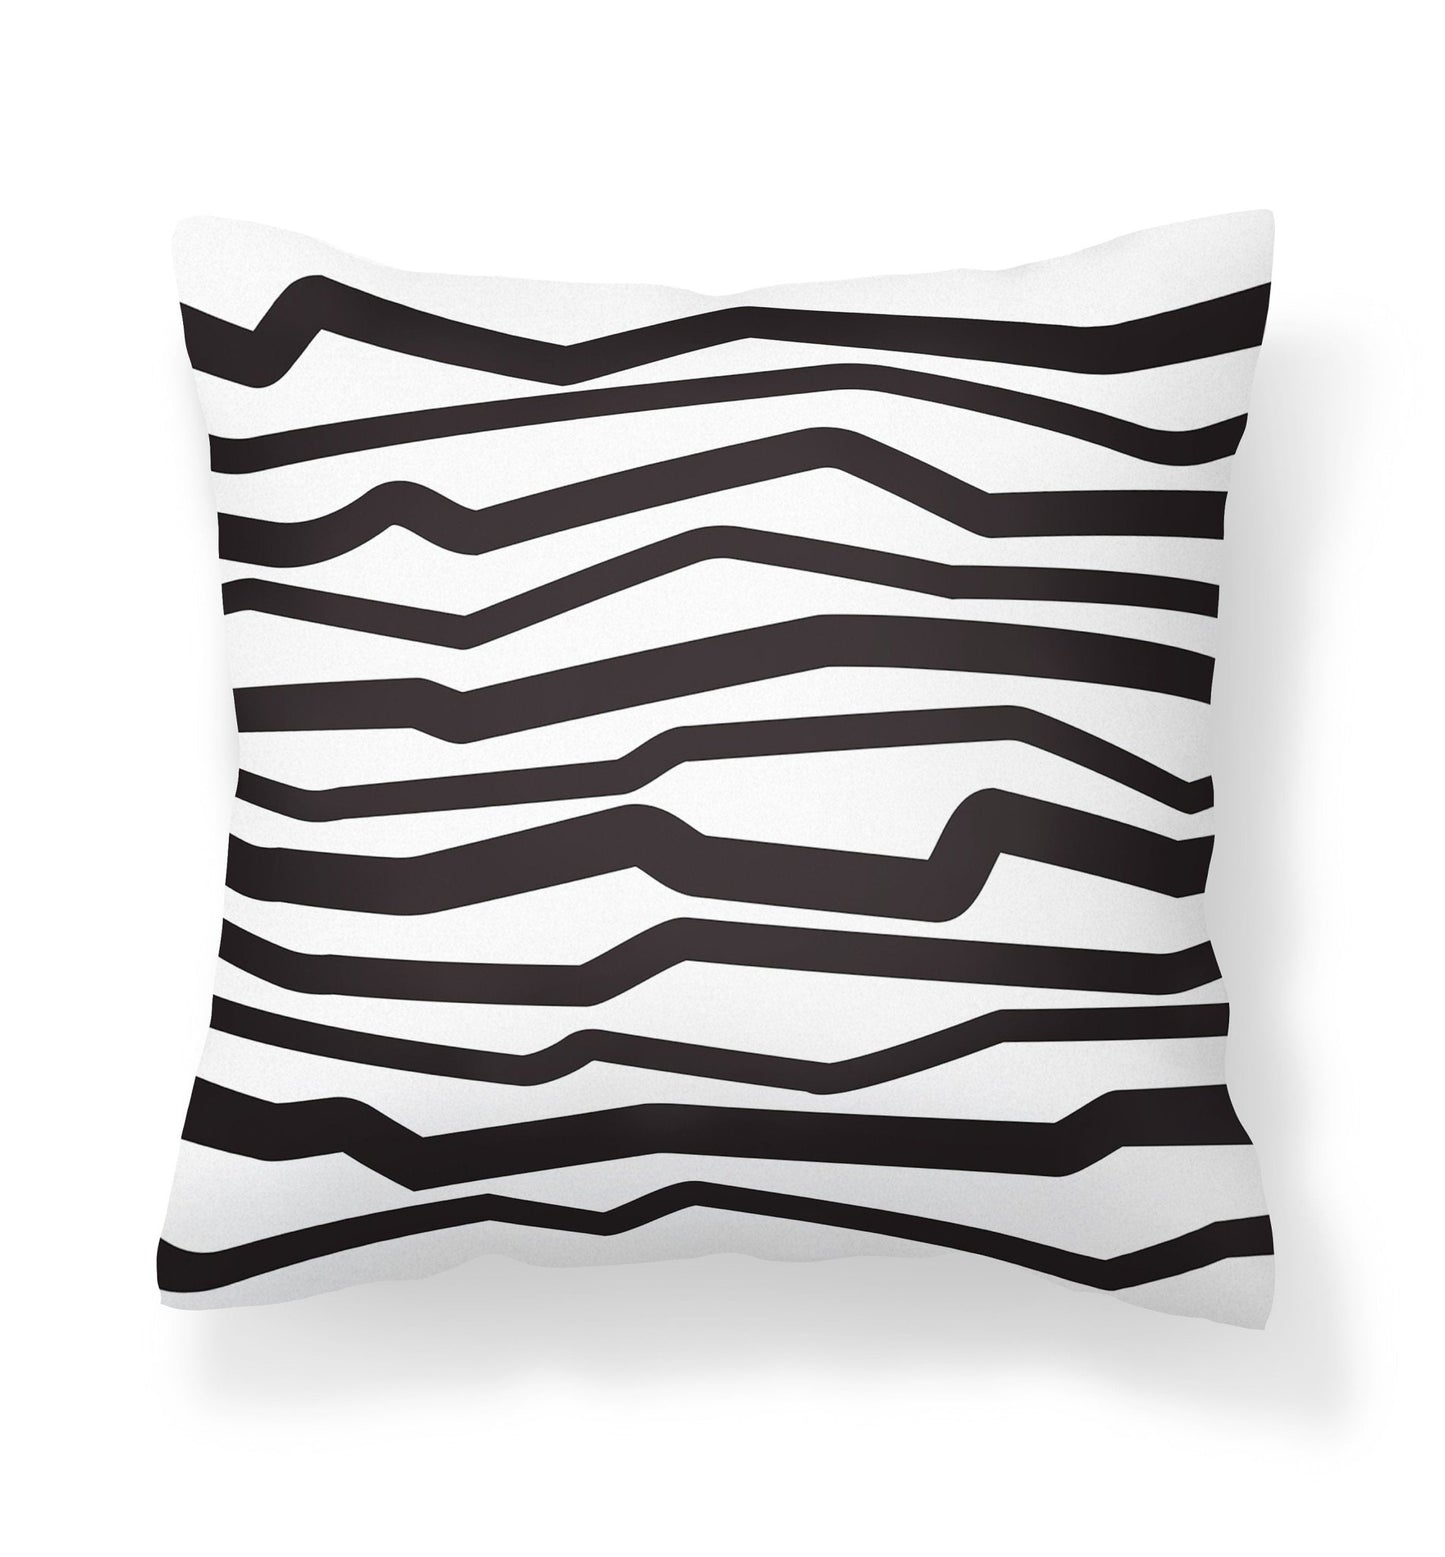 Black and White Zigzag Pillow Cover - Throw Pillows